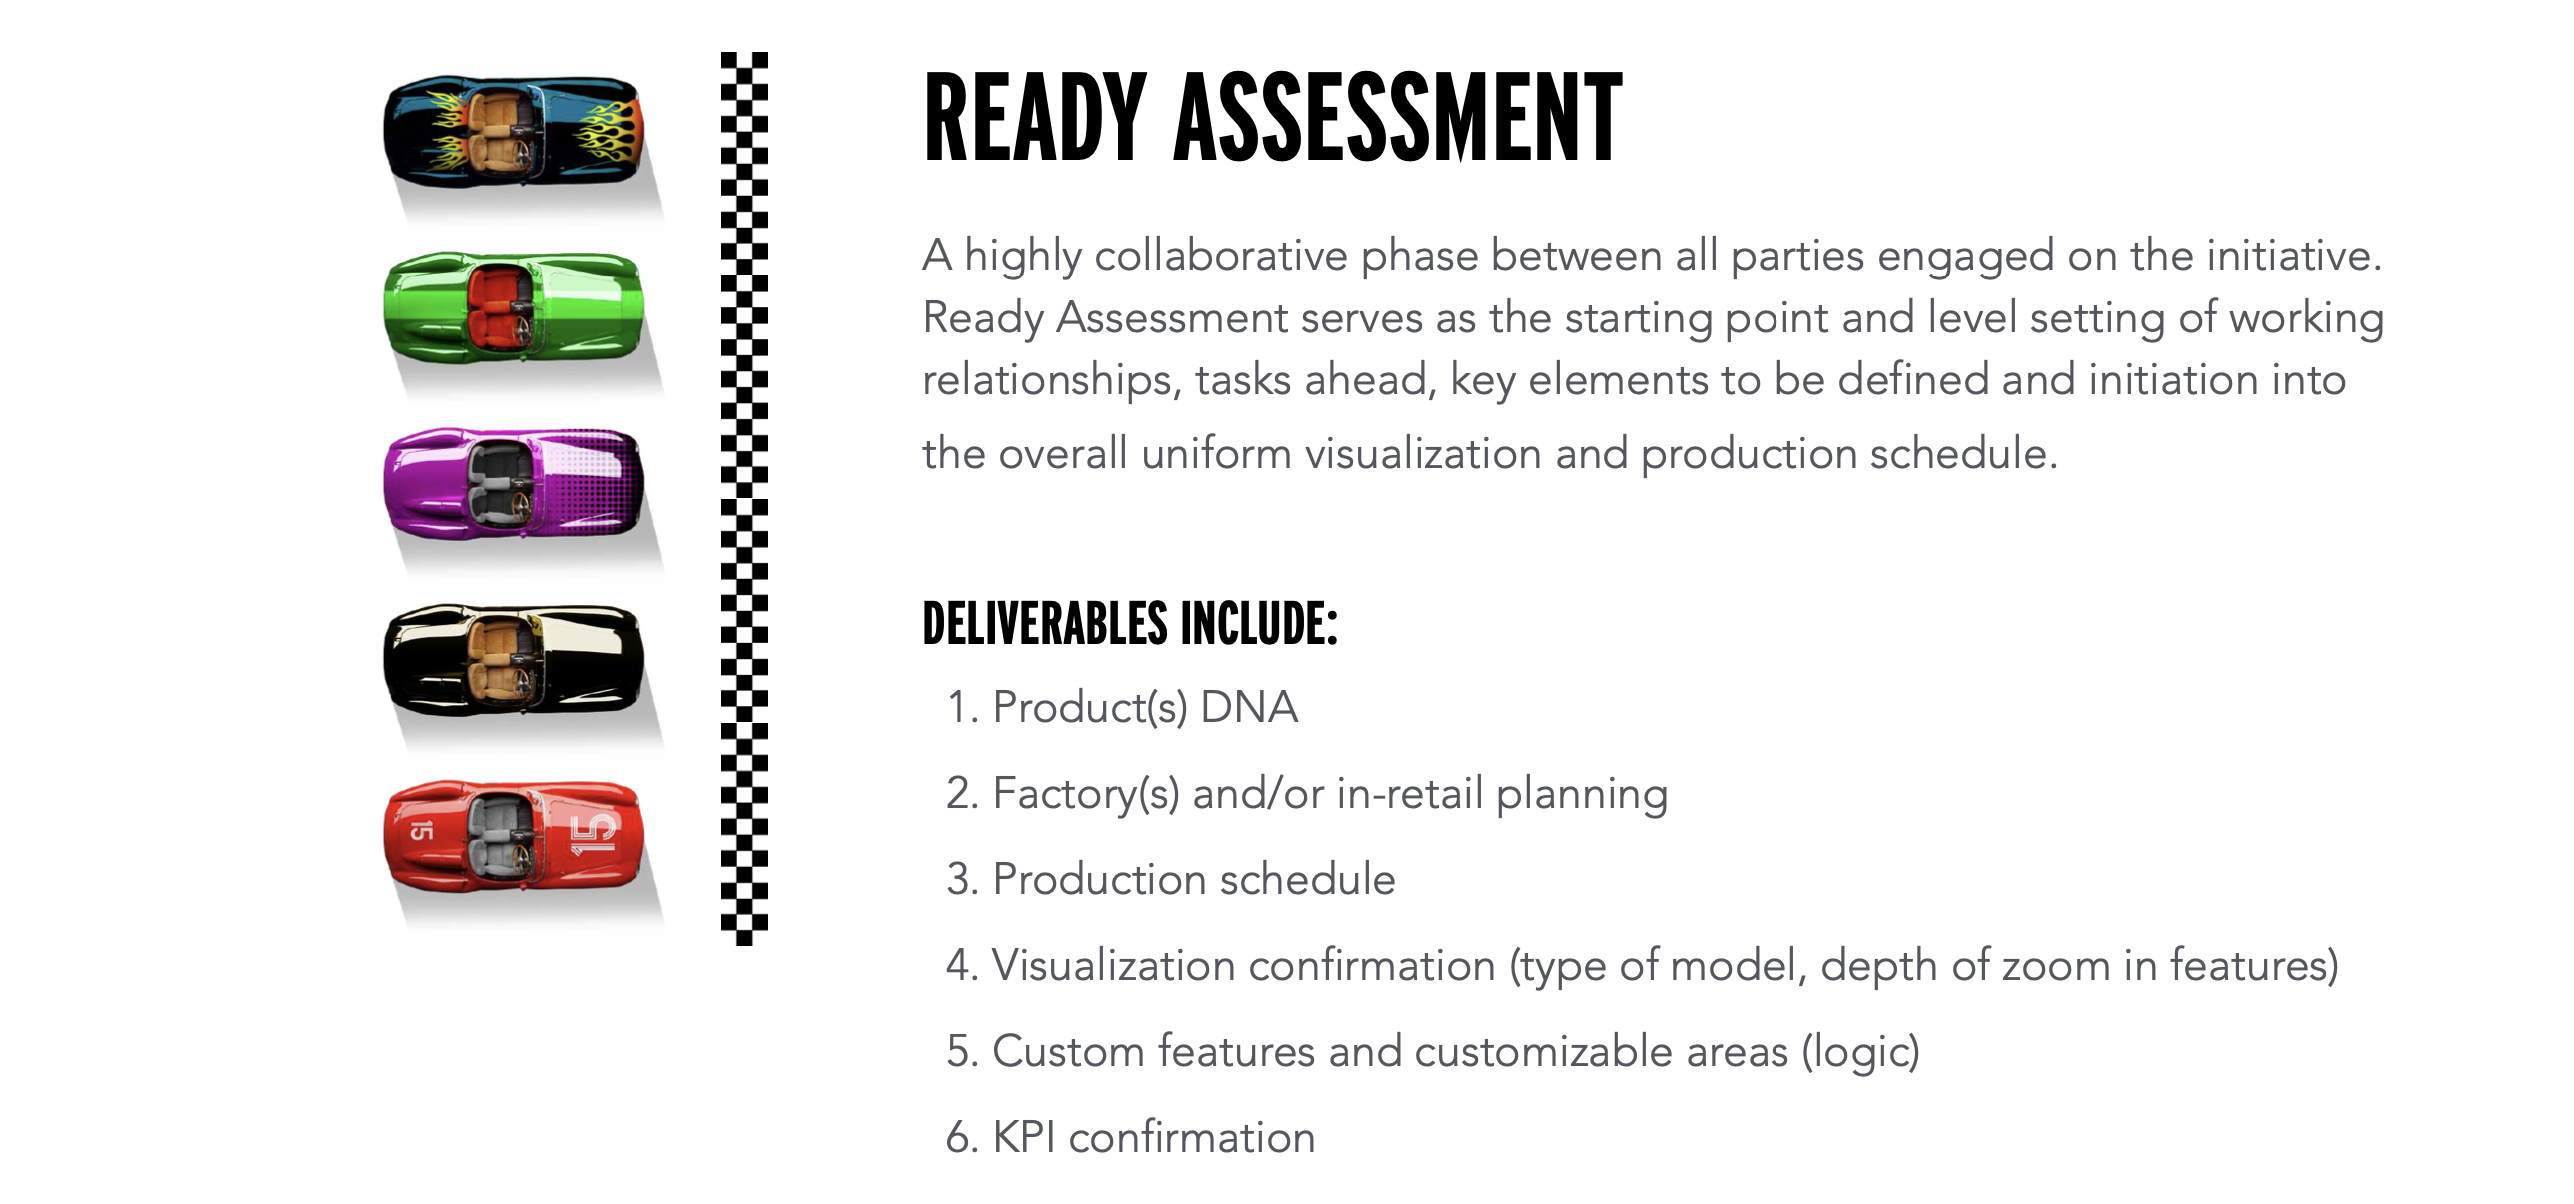 READY ASSESSMENT A highly collaborative phase between all parties engaged on the initiative.